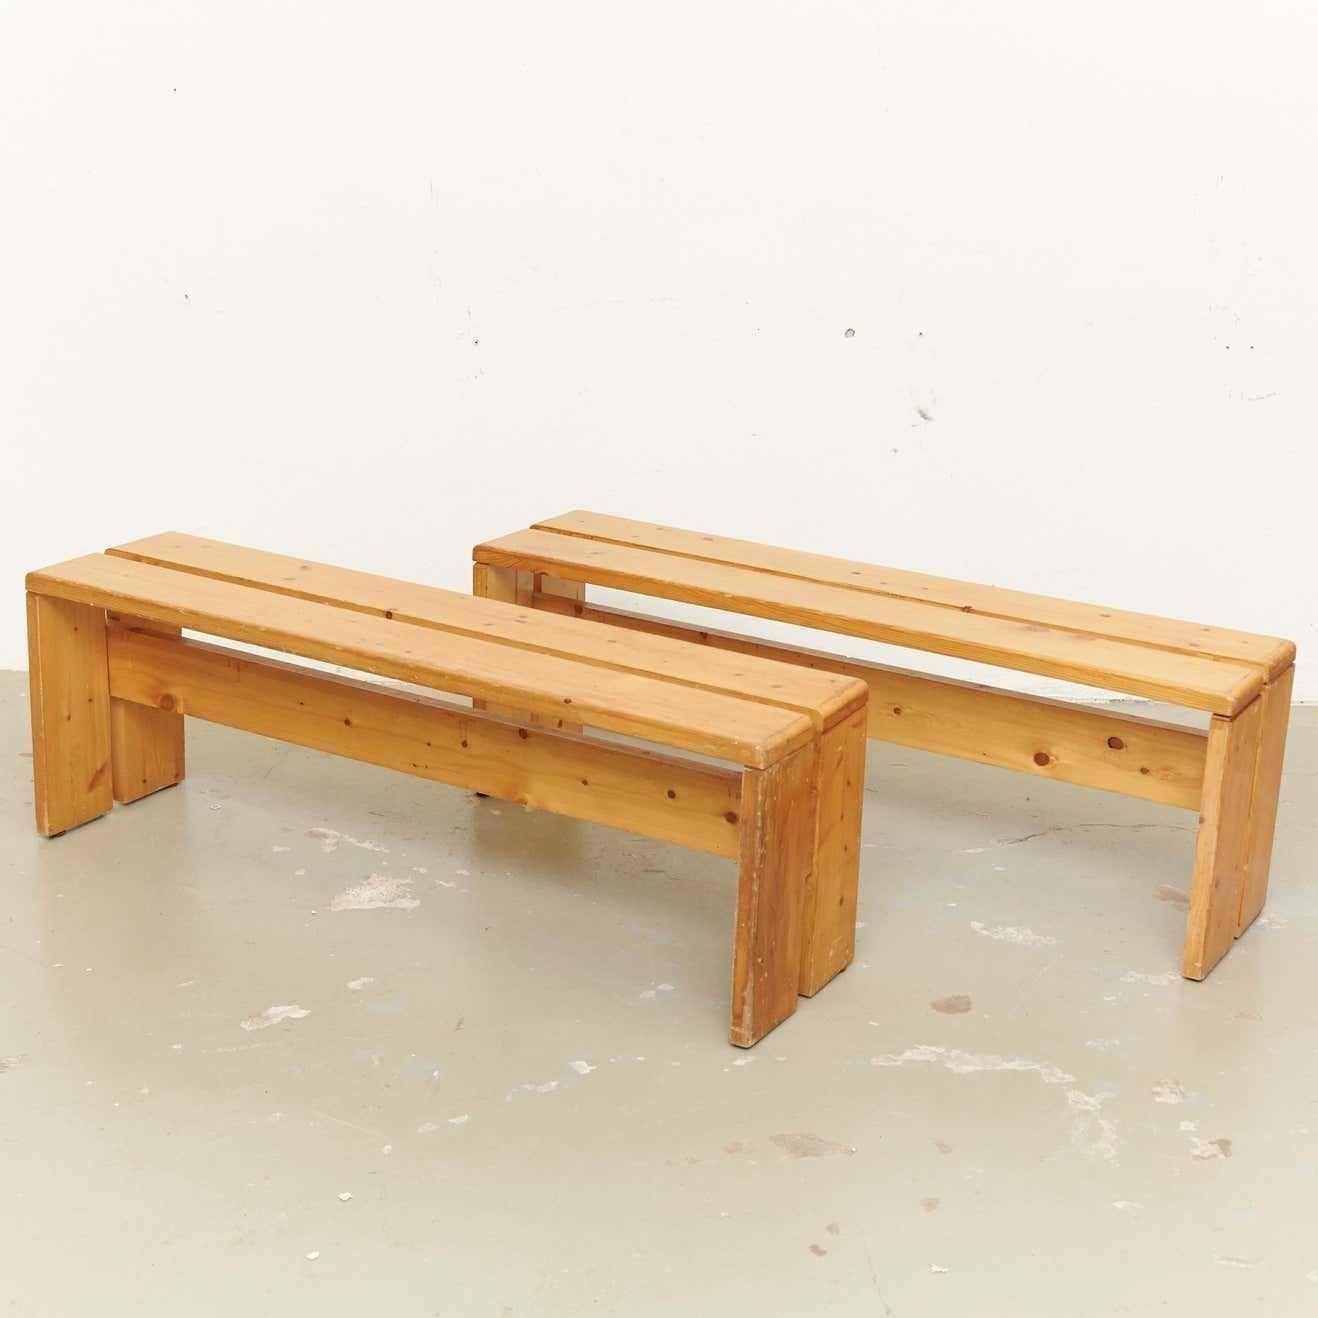 Benches designed by Charlotte Perriand for Les Arcs ski resort circa 1960, manufactured in France.
Pinewood.

In original condition, with wear consistent with age and use, preserving a beautiful patina.

Charlotte Perriand (1903-1999). She was